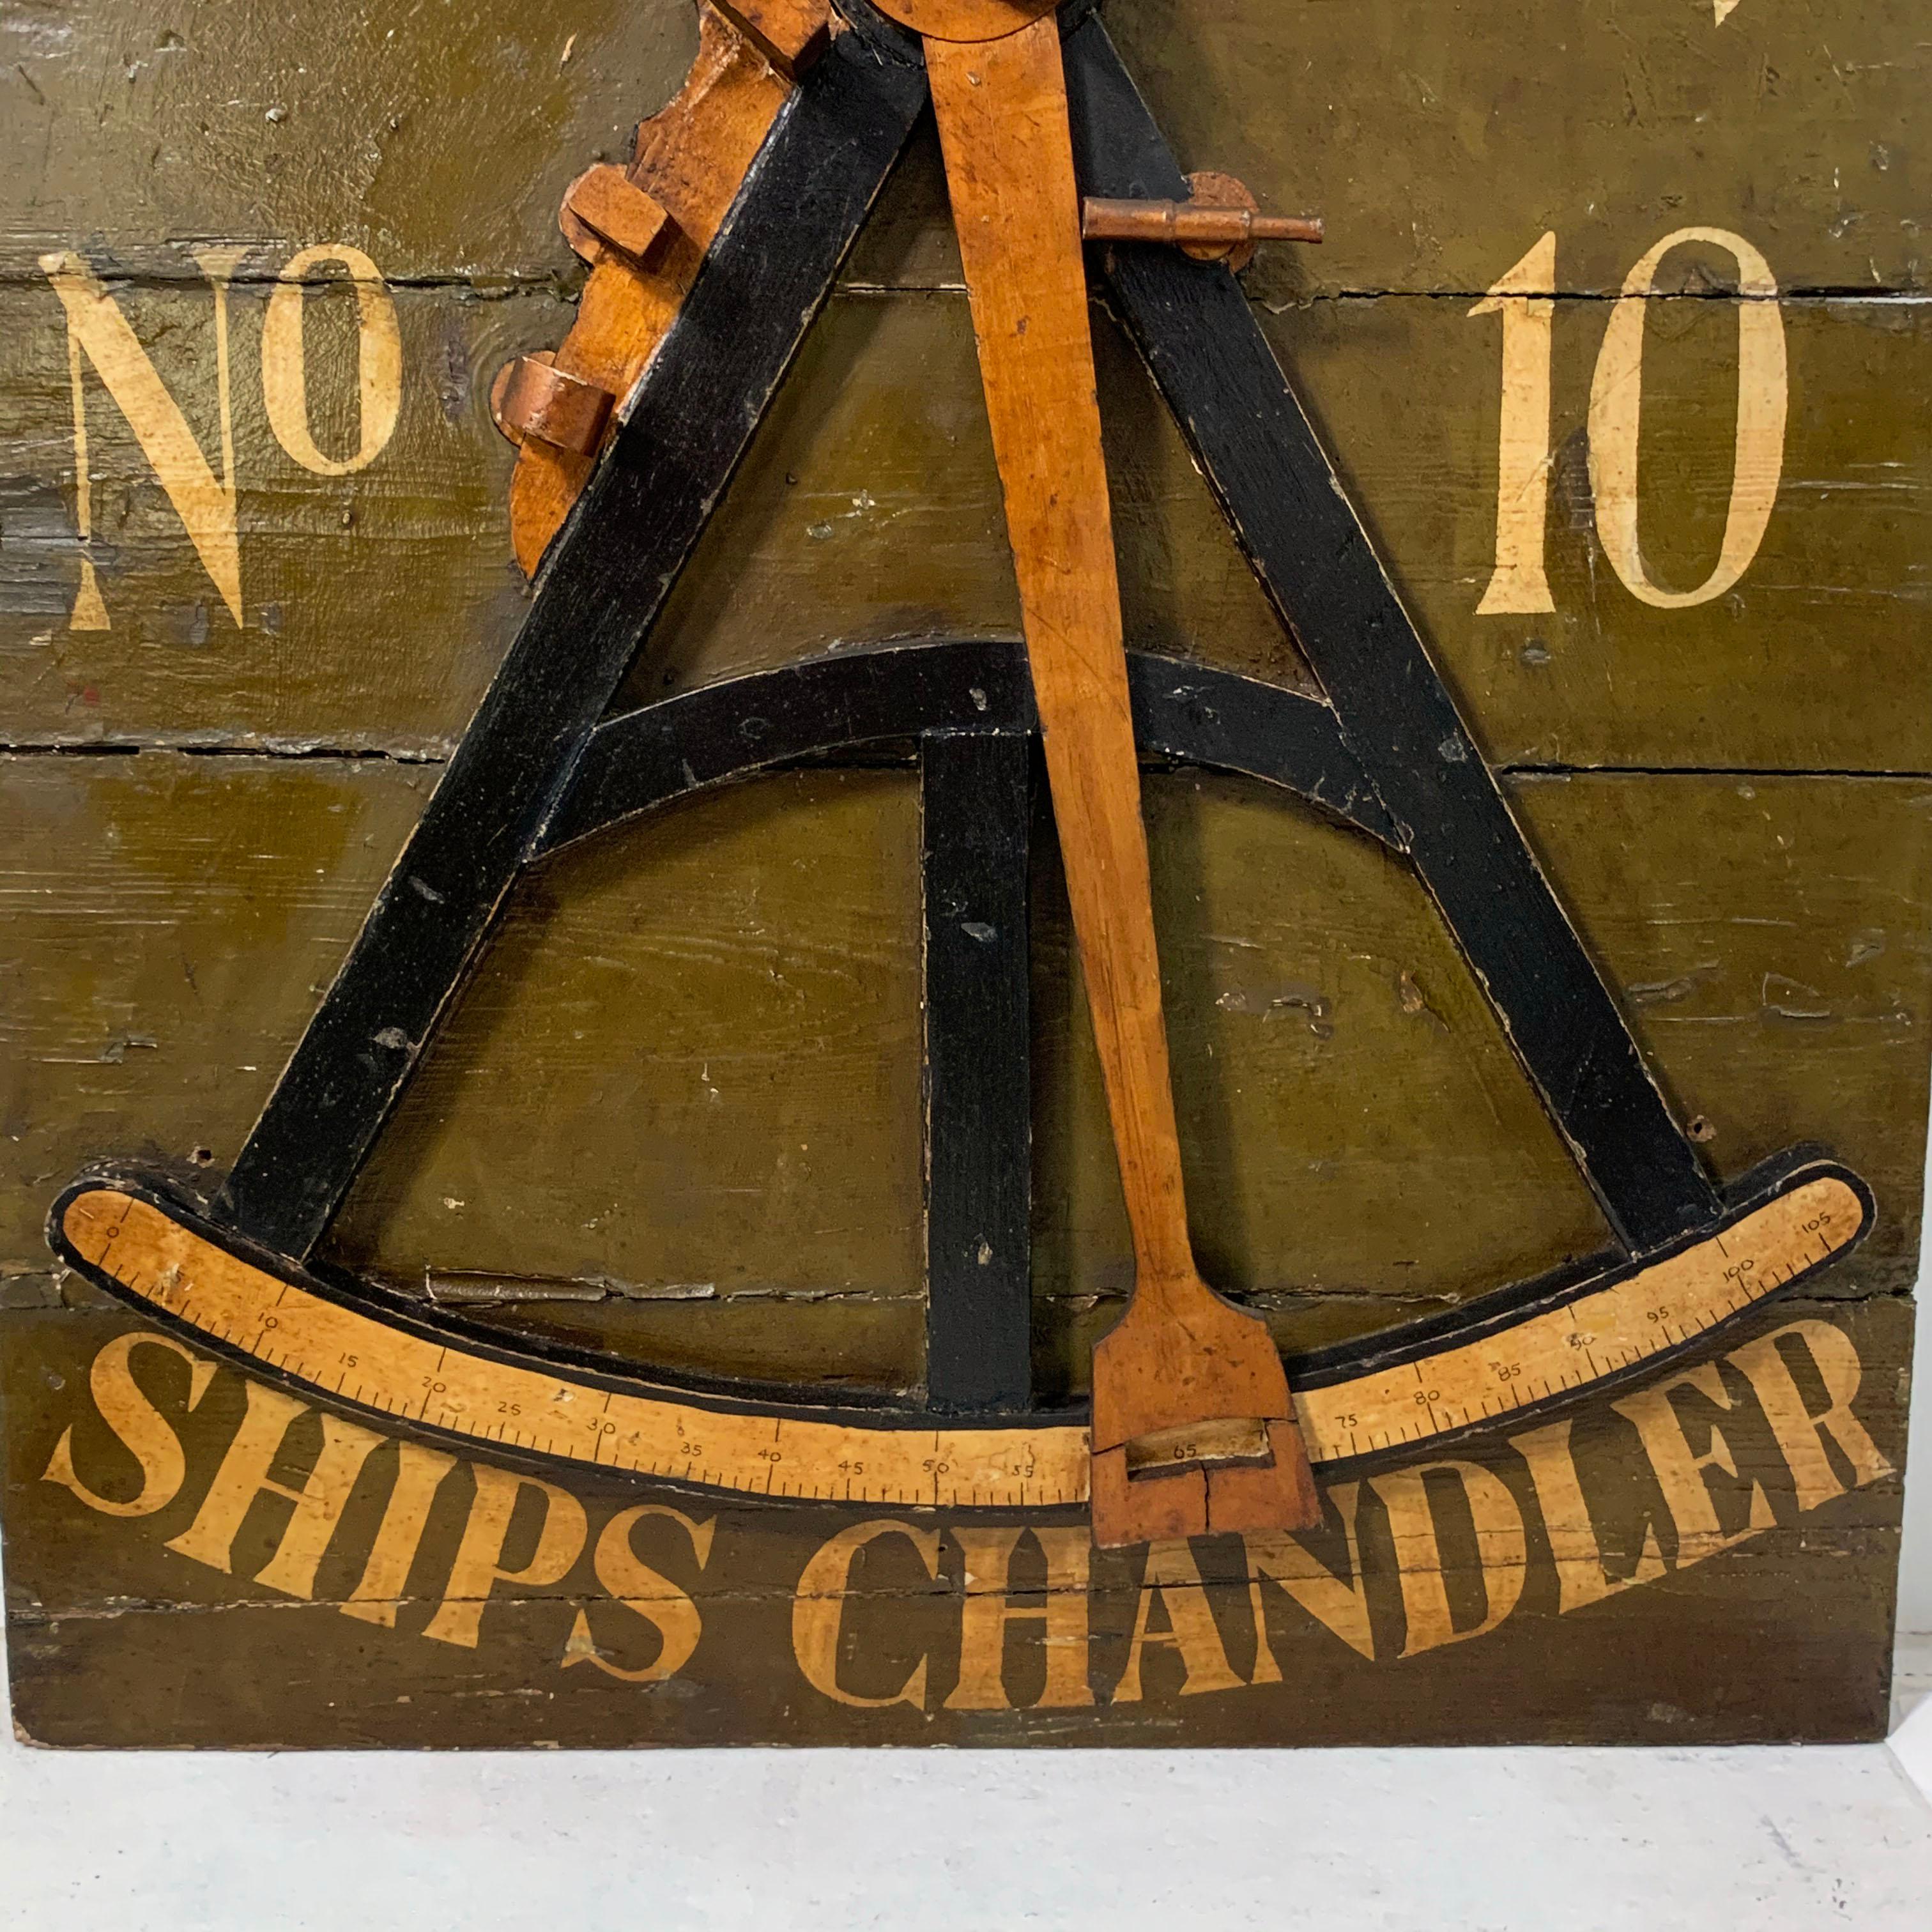 A relic from Boston’s mercantile history and the seafaring trade. This 19th century shop sign displays a fairly detailed replica of a navigator’s octant (or sextant) and the proprietor’s name and street number. A significant portion of society would